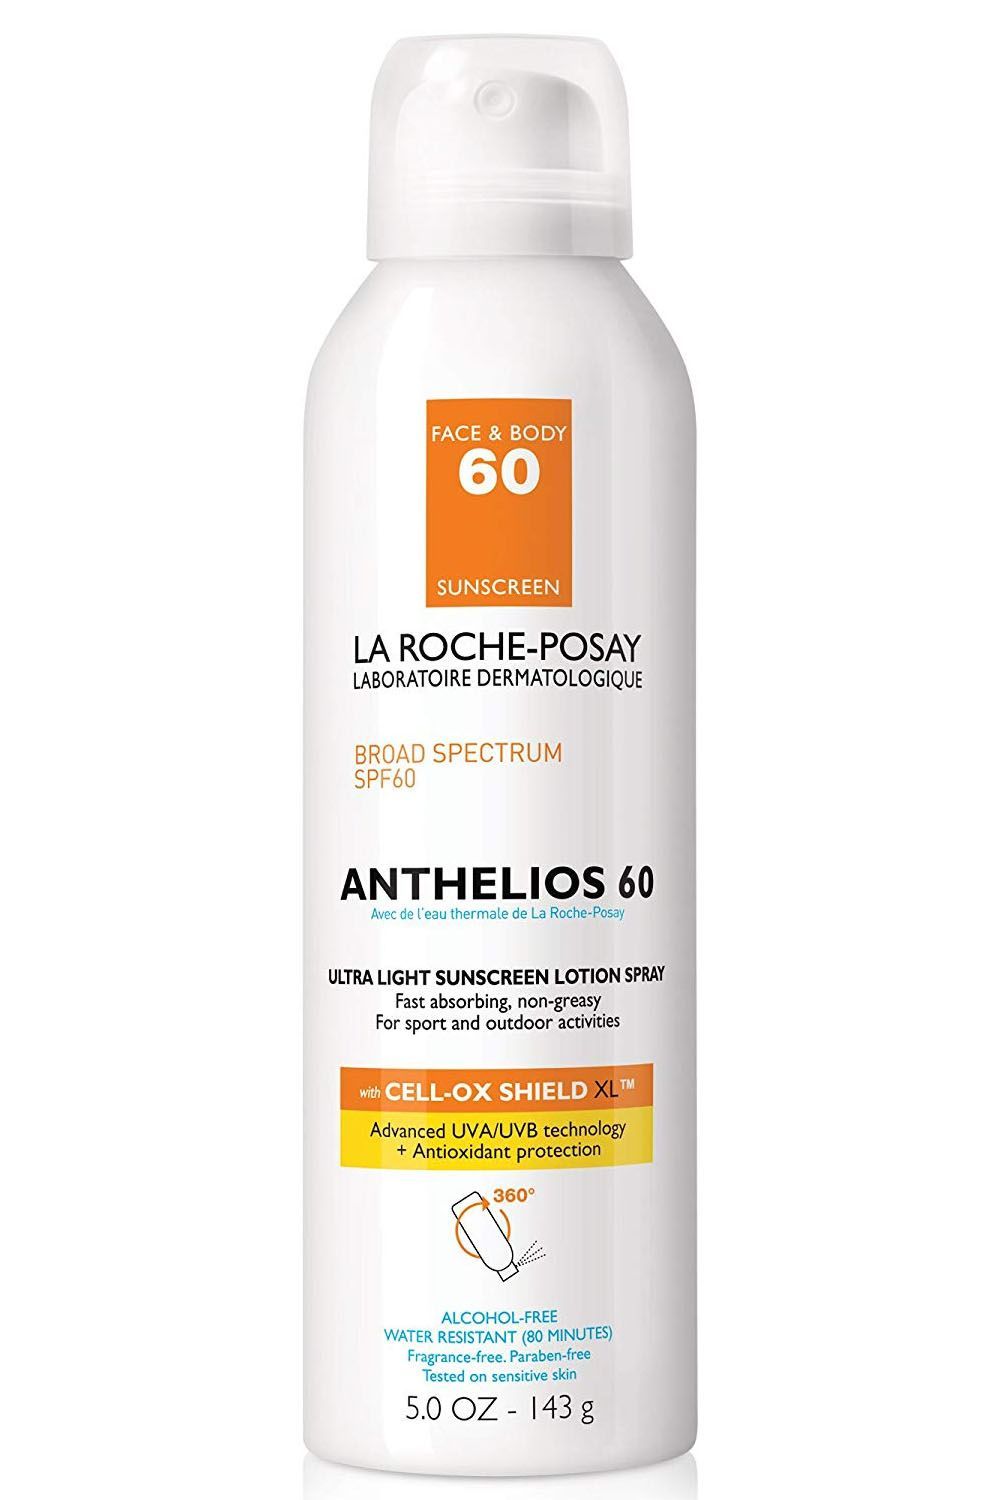 365 everyday value mineral sunscreen sport lotion spf 30